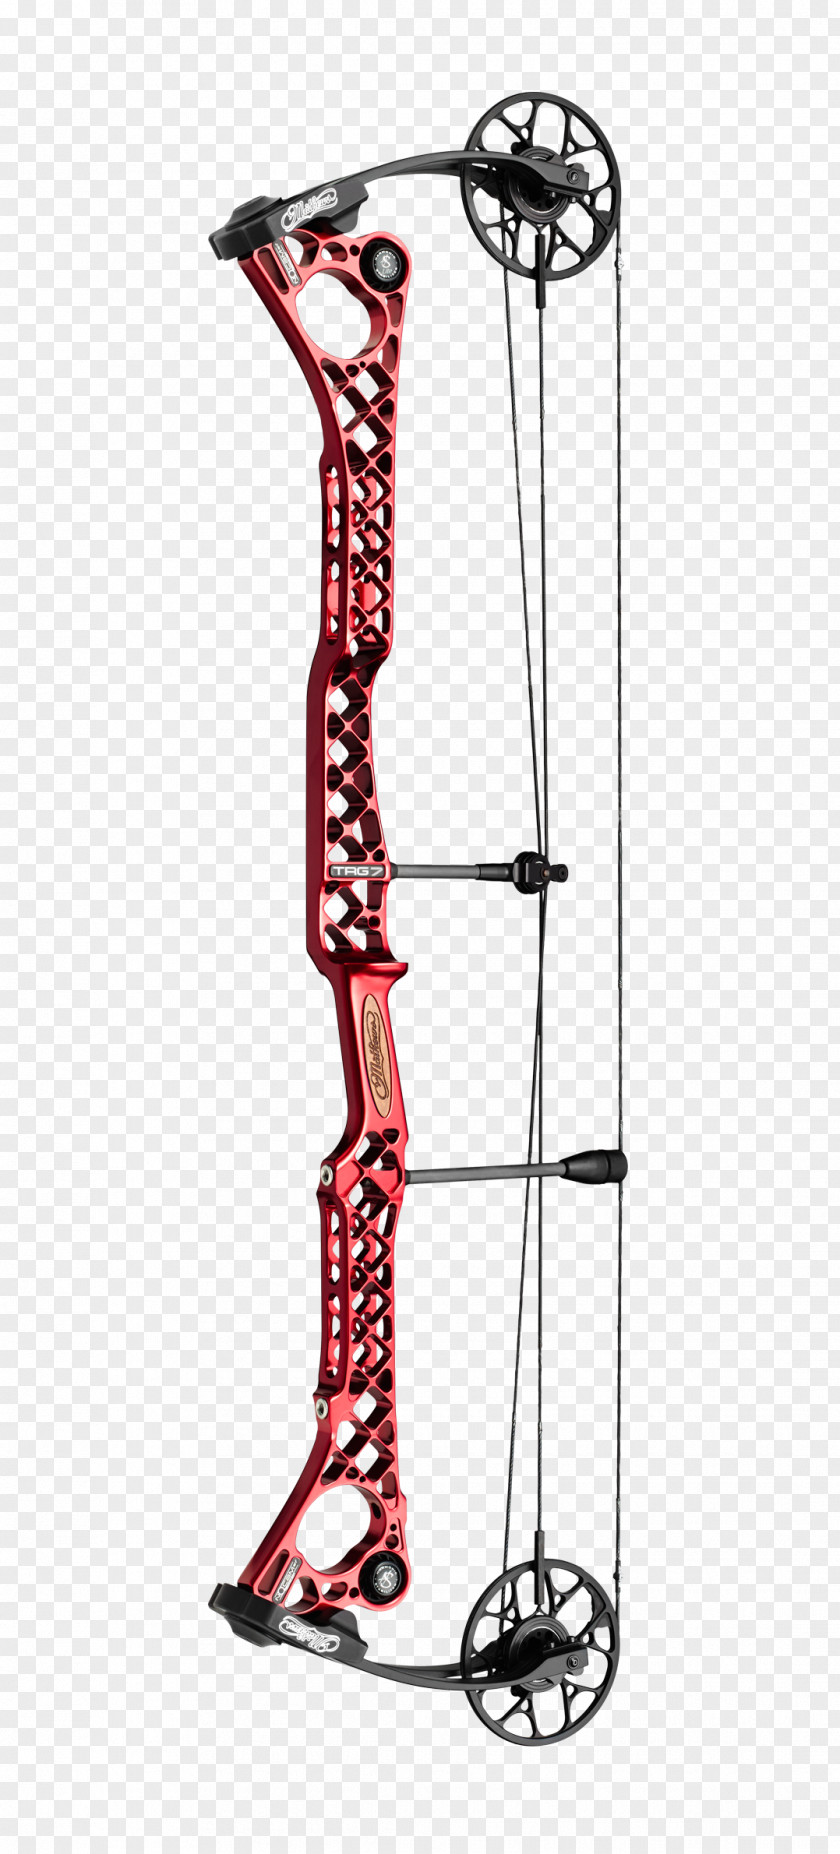 2014 Archery Equipment Bow And Arrow Compound Bows Hunting Binary Cam PNG